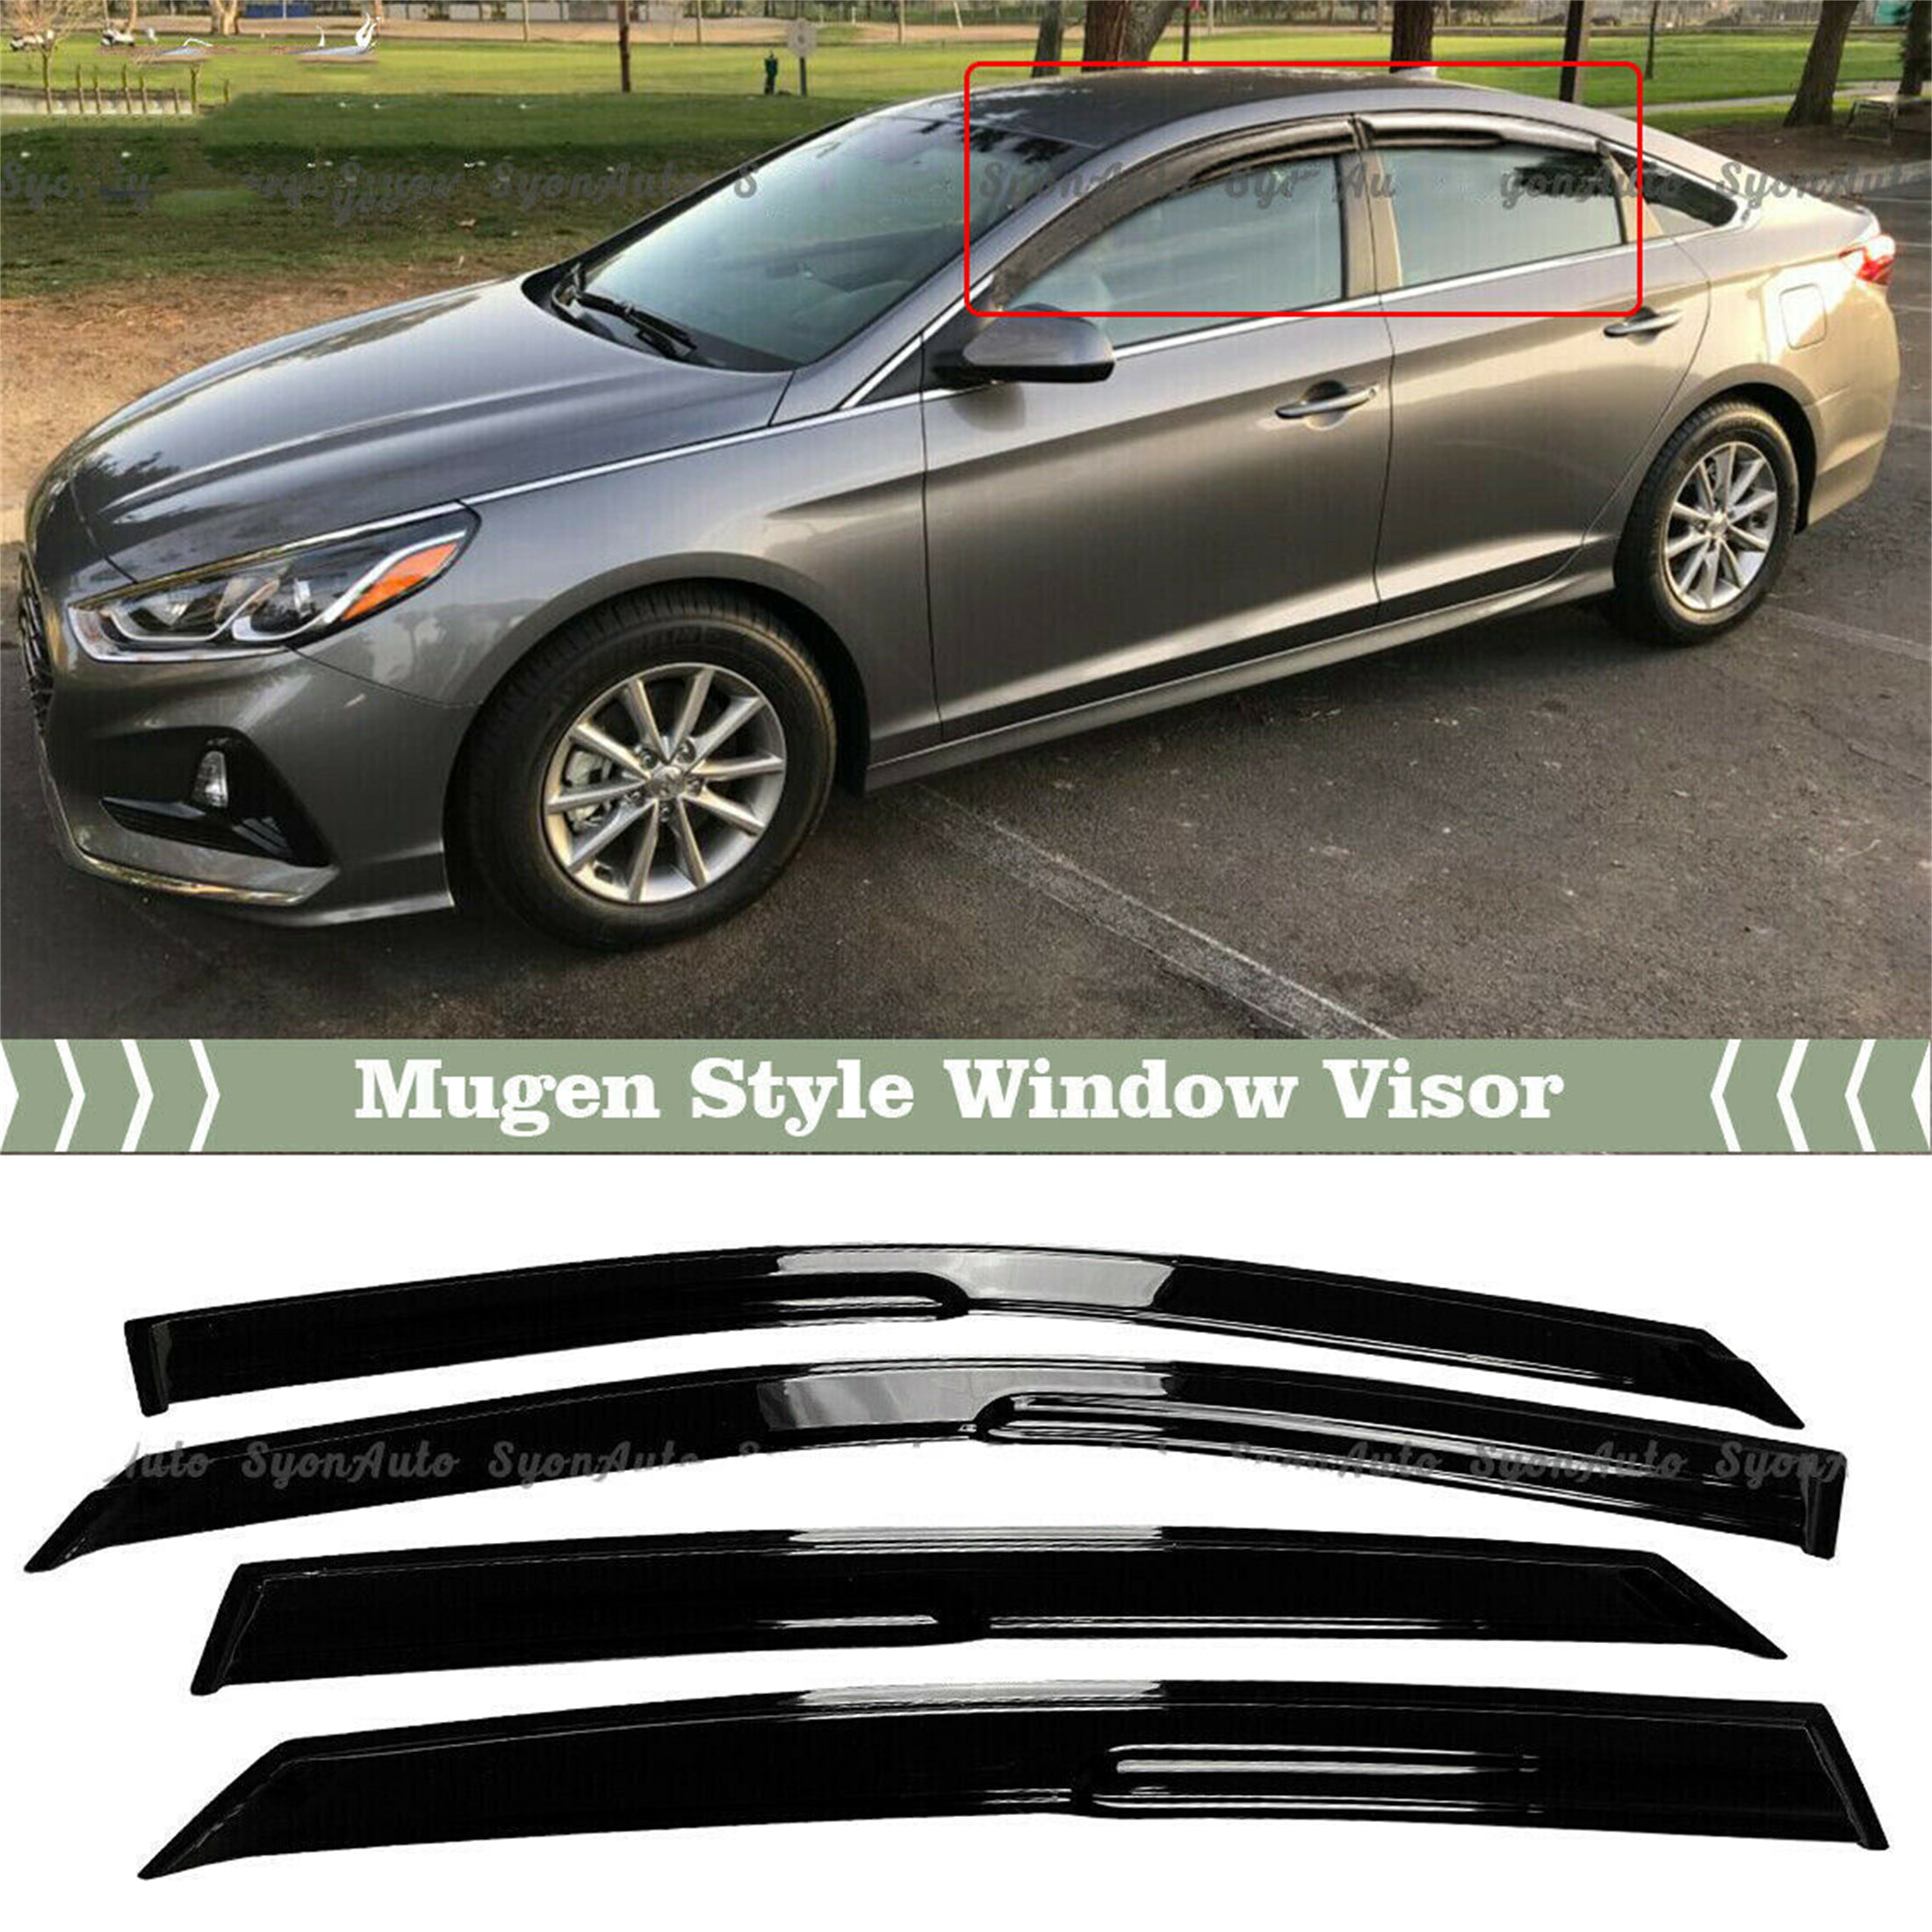 Cuztom Tuning Fits for 2016-2019 Toyota Prius Smoke Tinted Low Profile Window Visor Rain Guard Deflector with Clips 